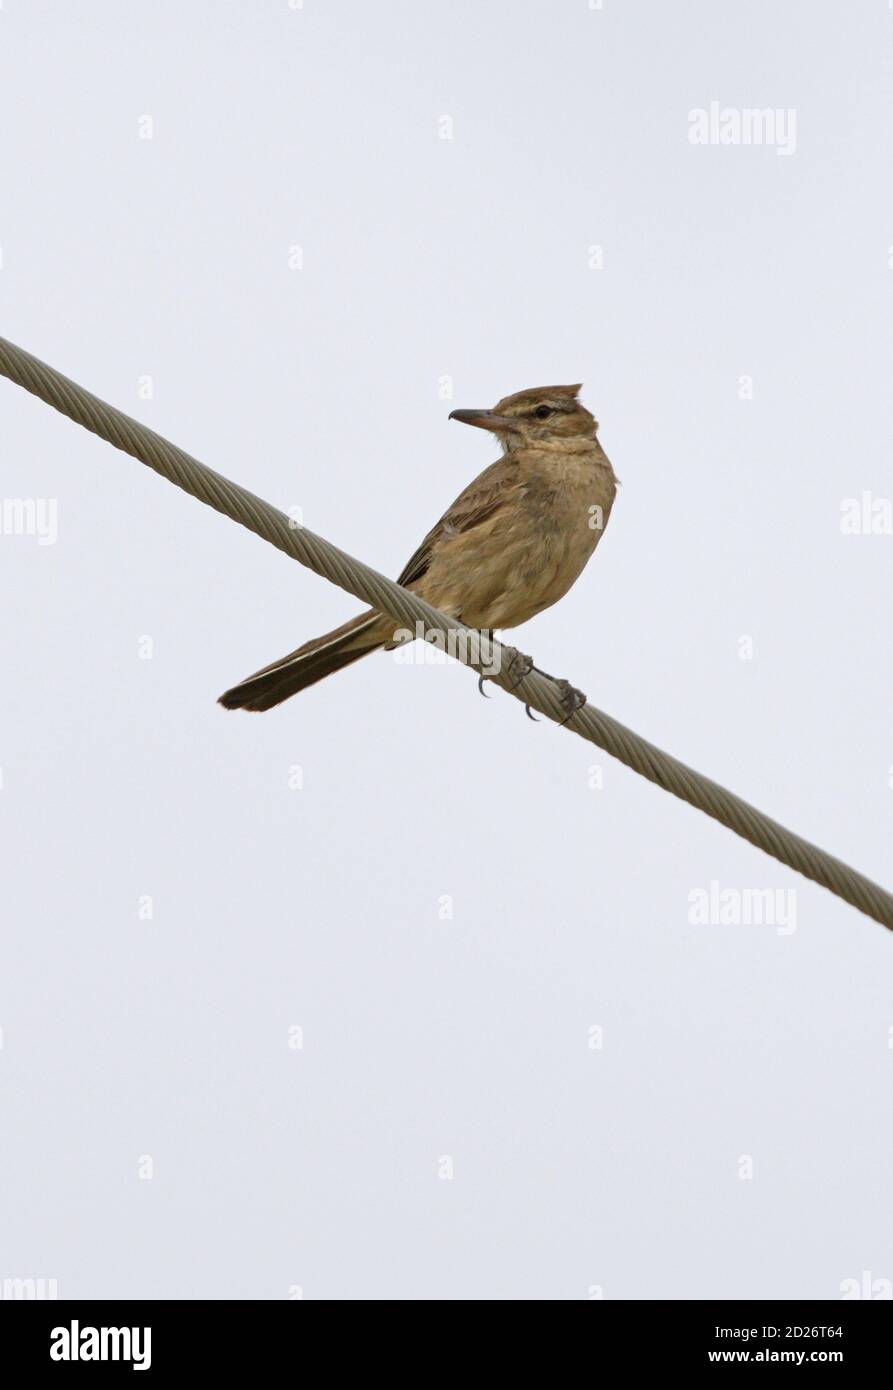 Black-billed Shrike-tyrant (Agriornis montana) adult perched on power line  Jujuy, Argentina              January Stock Photo